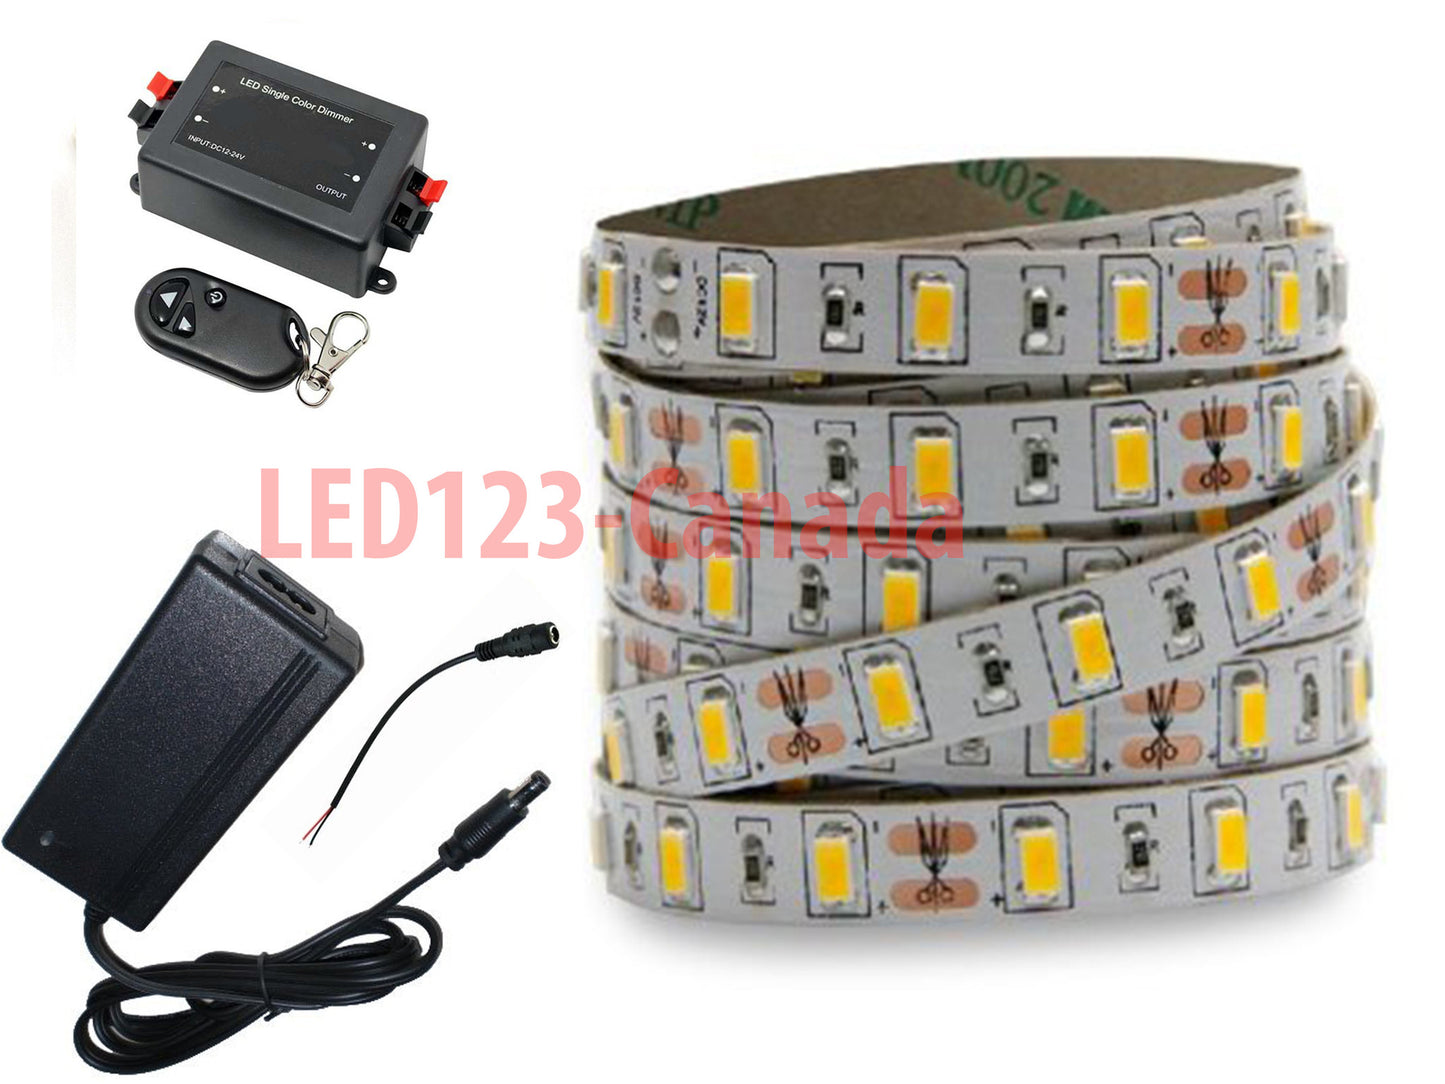 16.4ft/5M 5630 300LEDs FLEXIBLE STRIP LIGHT COMPLETE KIT/ HIGHT QUALITY WITH cUL APPROVED POWER SUPPLY WITH REMOTE CONTROLLER